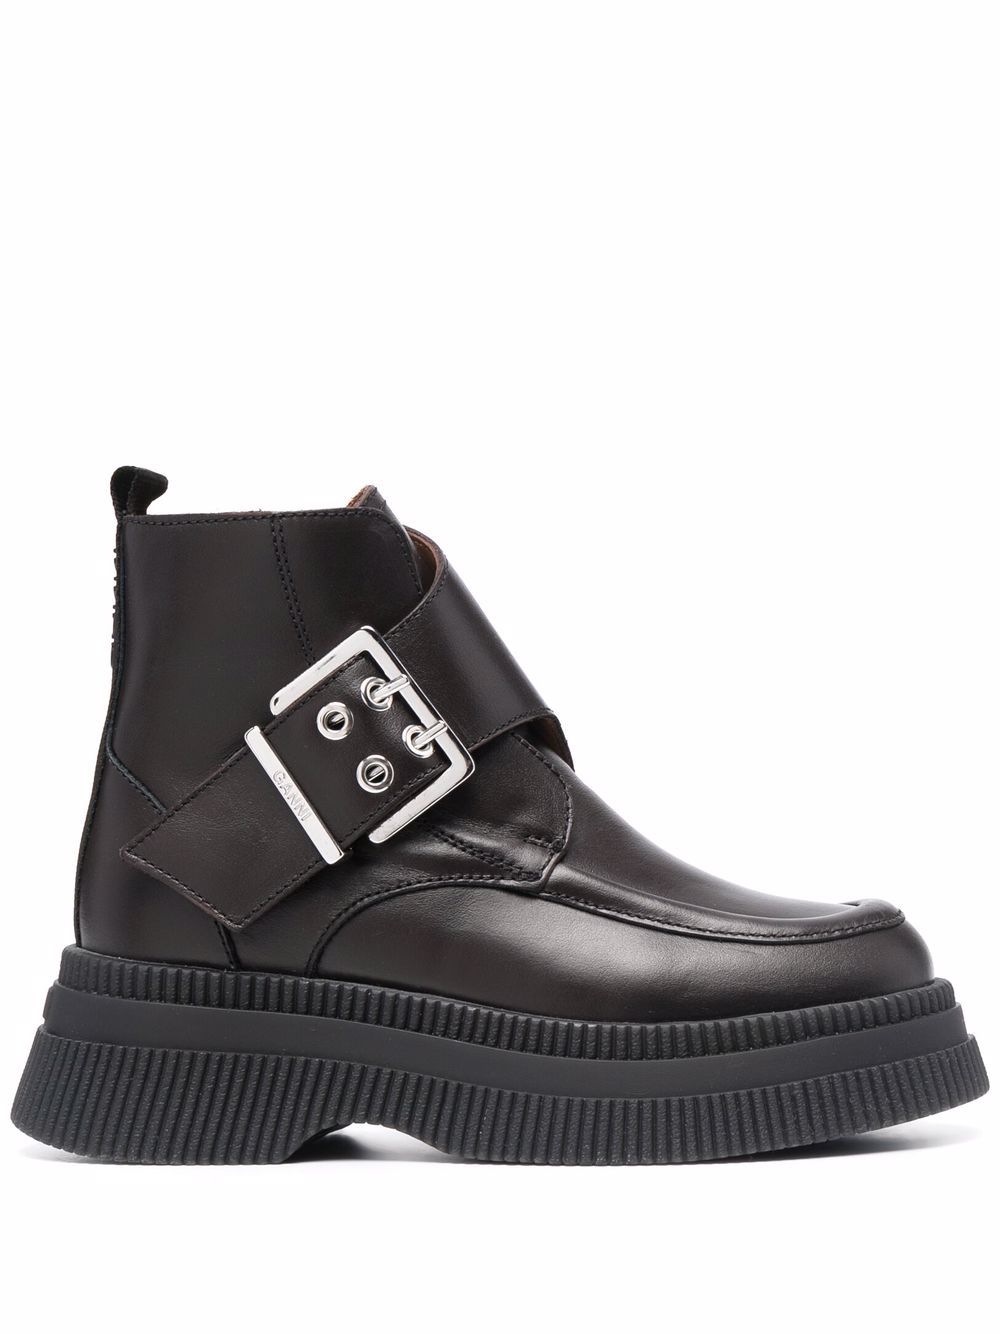 T.U.K pointed vegan creeper boots with multi buckle